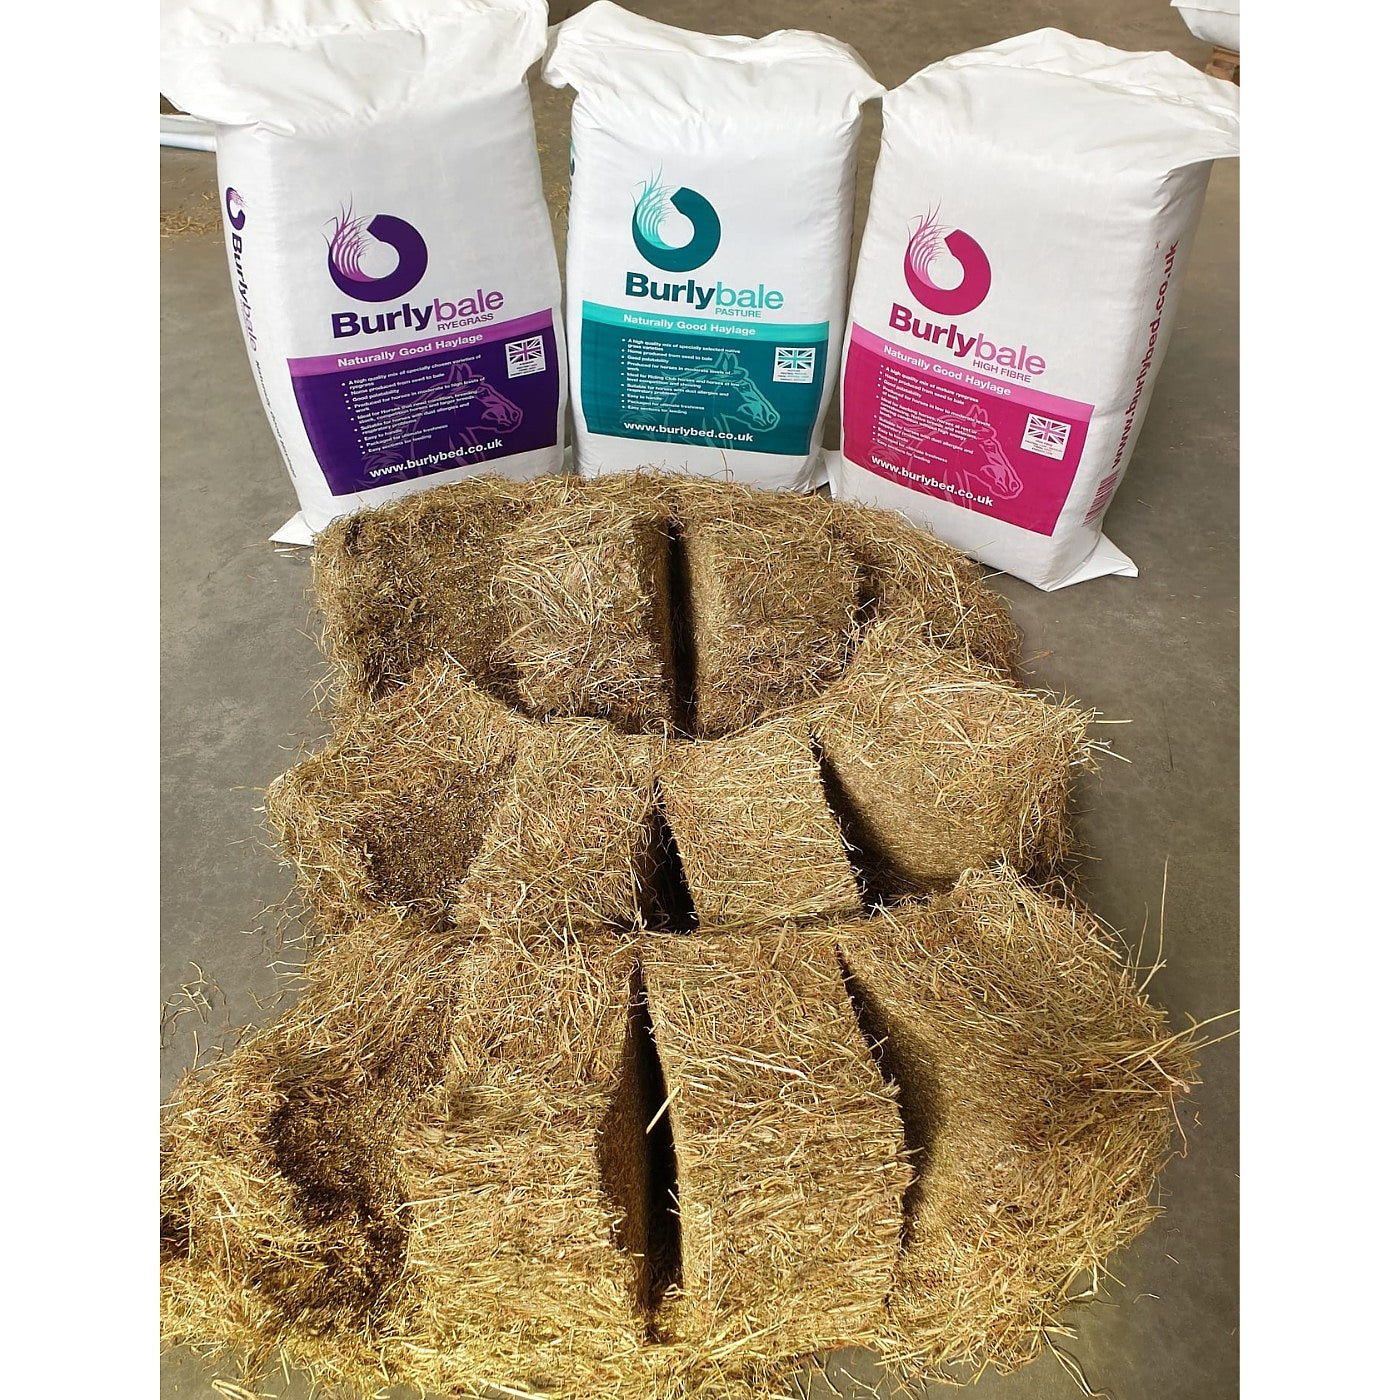 Burlybale - Pasture | Haylage for Horses - Buy Online SPR Centre UK